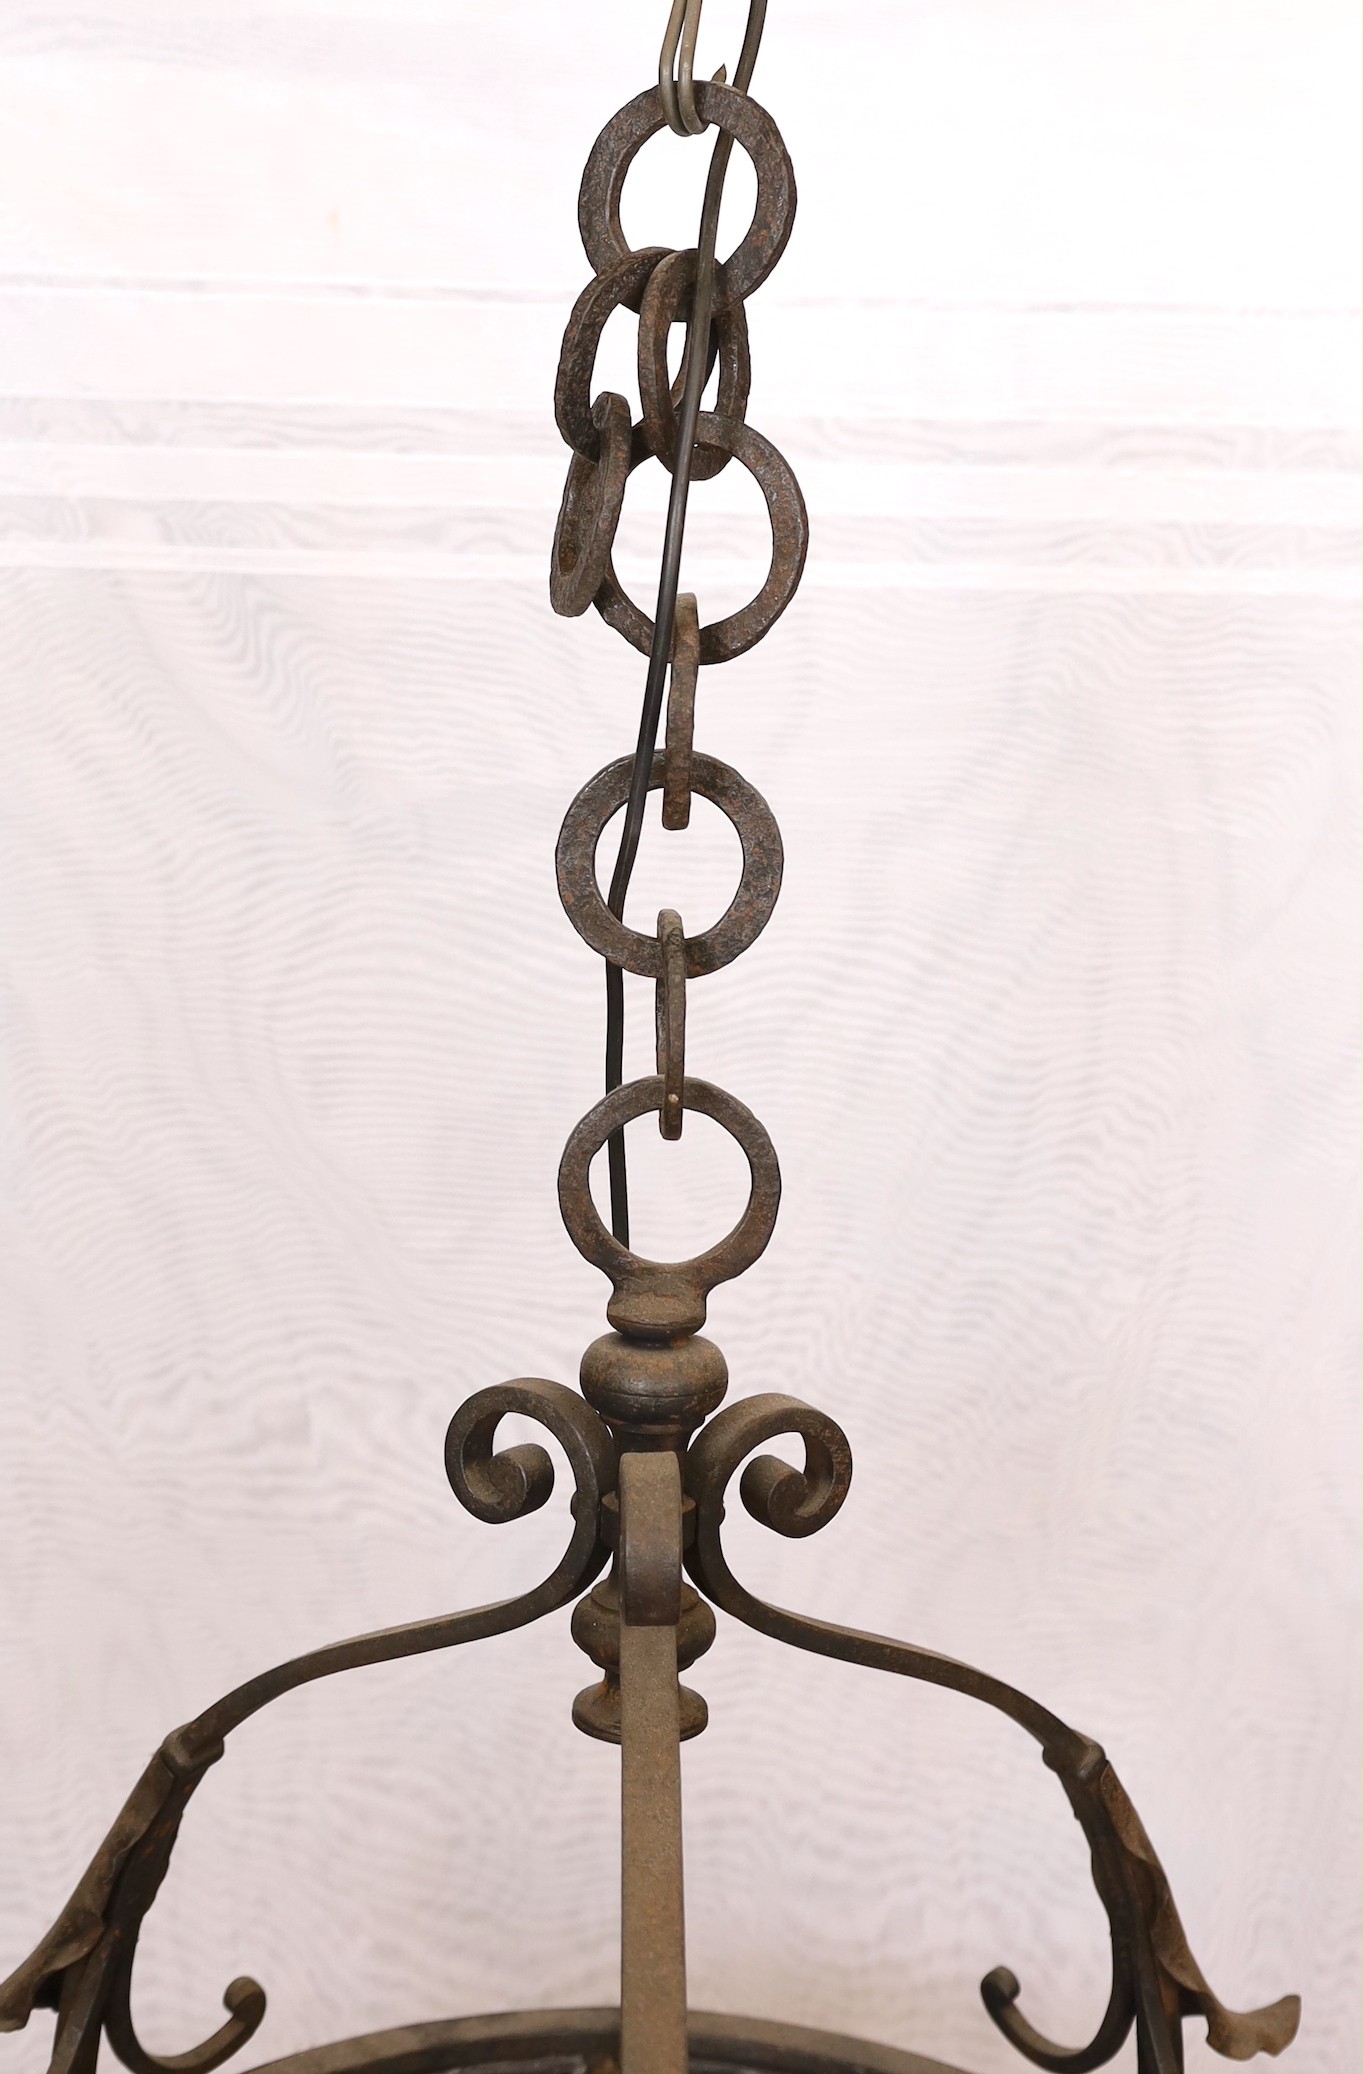 An English Arts & Crafts wrought iron and stained glass basket shaped light fitting, height 70cm to the top of the fitting with additional 10 link heavy wrought iron chain. width 52cm.